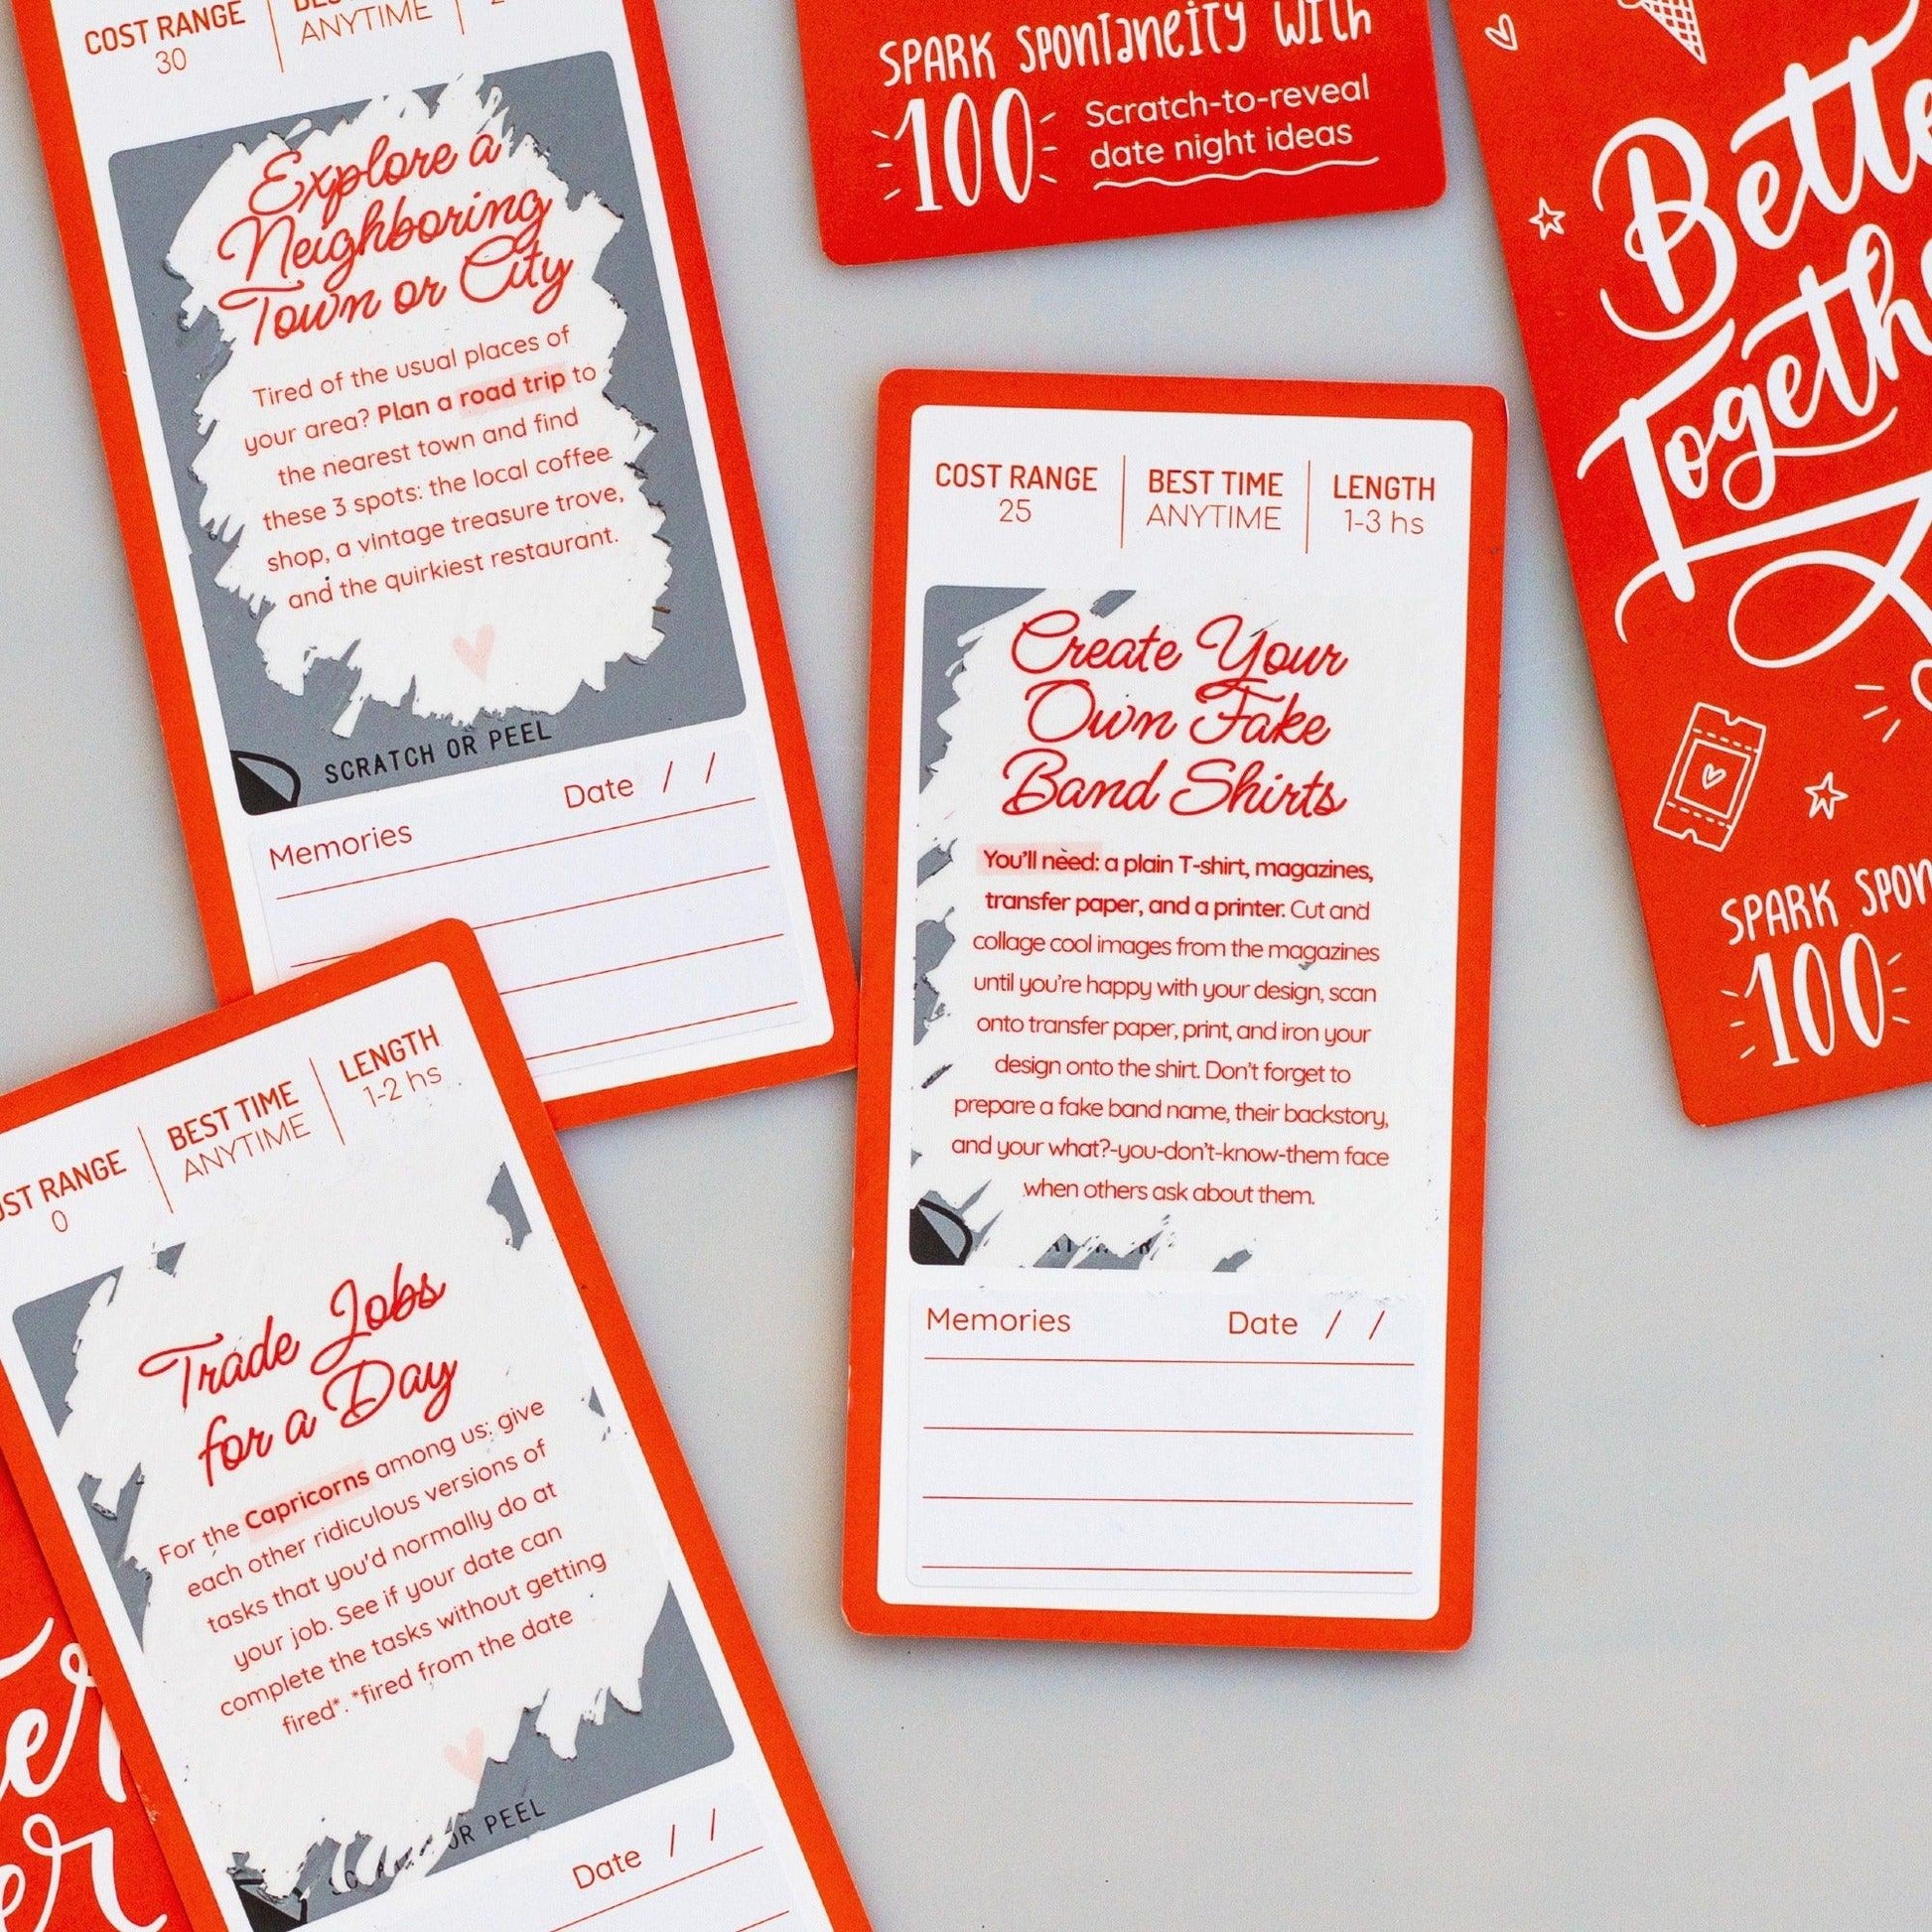 The Adventure Challenge Couples Edition | 50 Scratch-Off Date Activities | Perfect Valentine's Gift